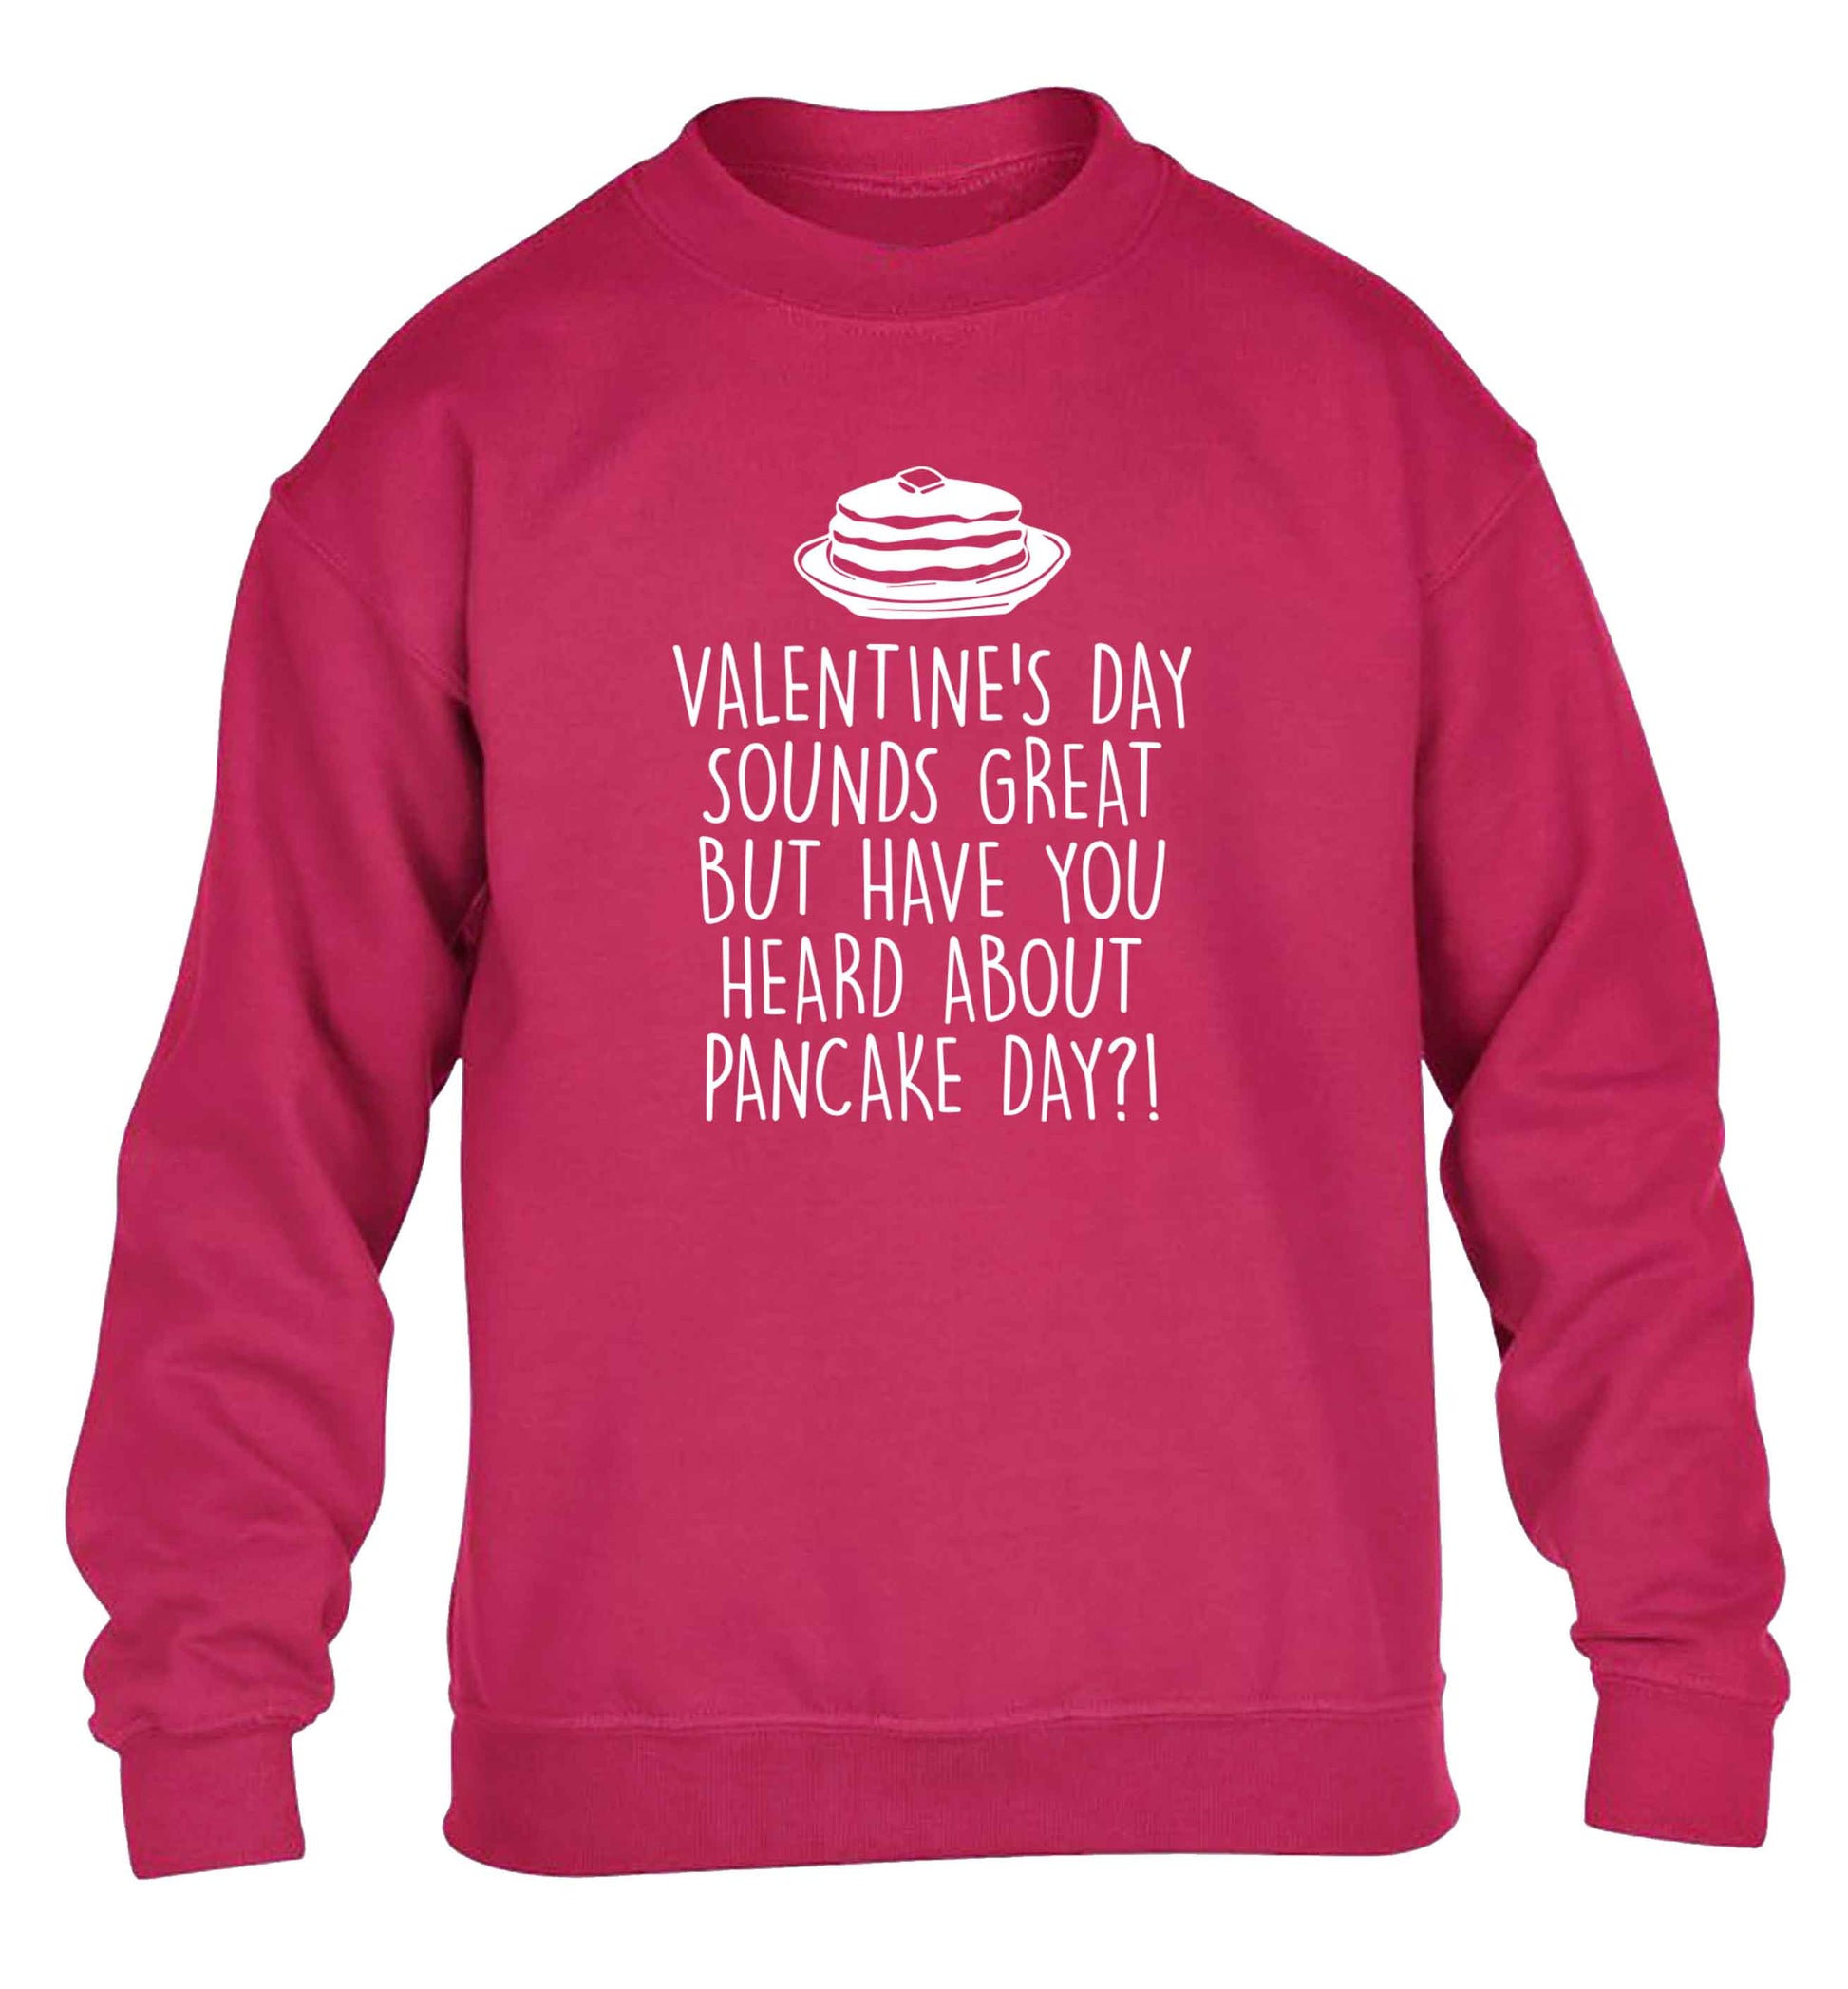 Valentine's day sounds great but have you heard about pancake day?! children's pink sweater 12-13 Years